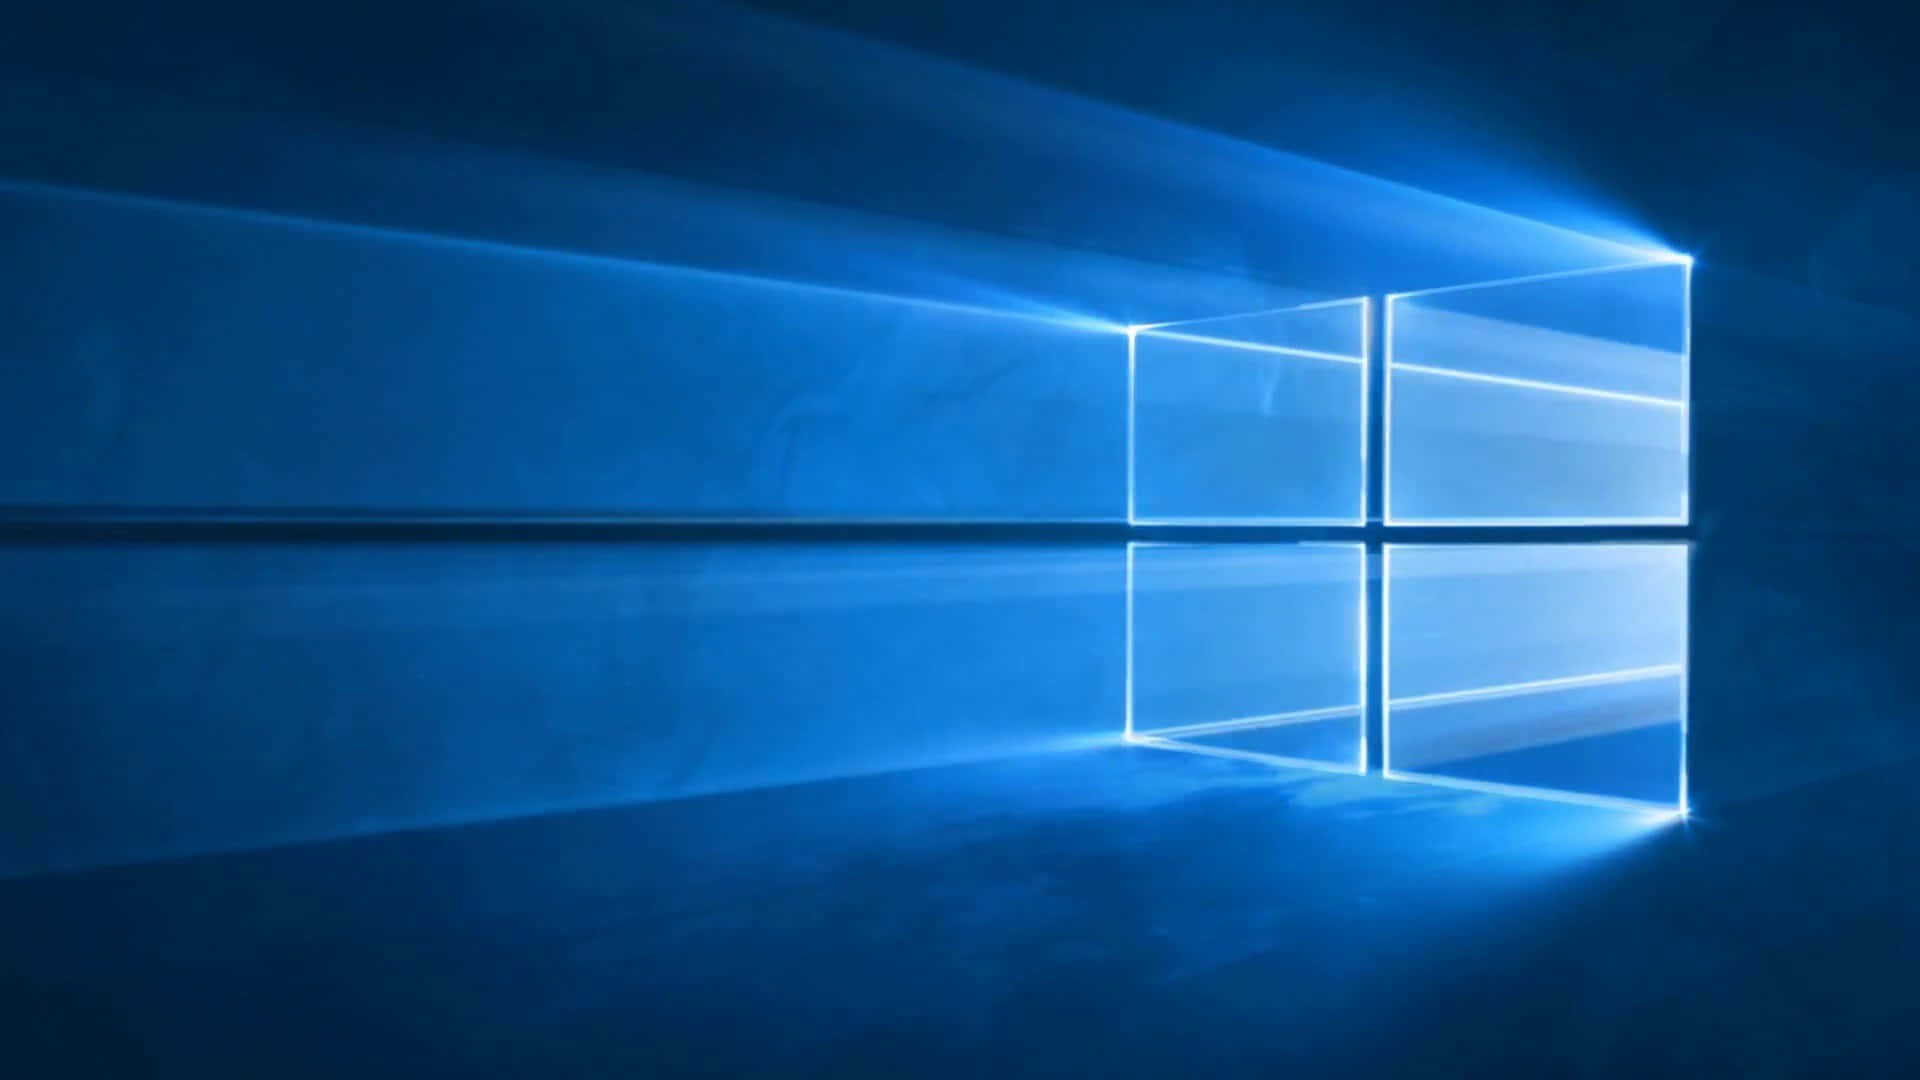 Windows 10 - A Blue Window With Light Coming Through